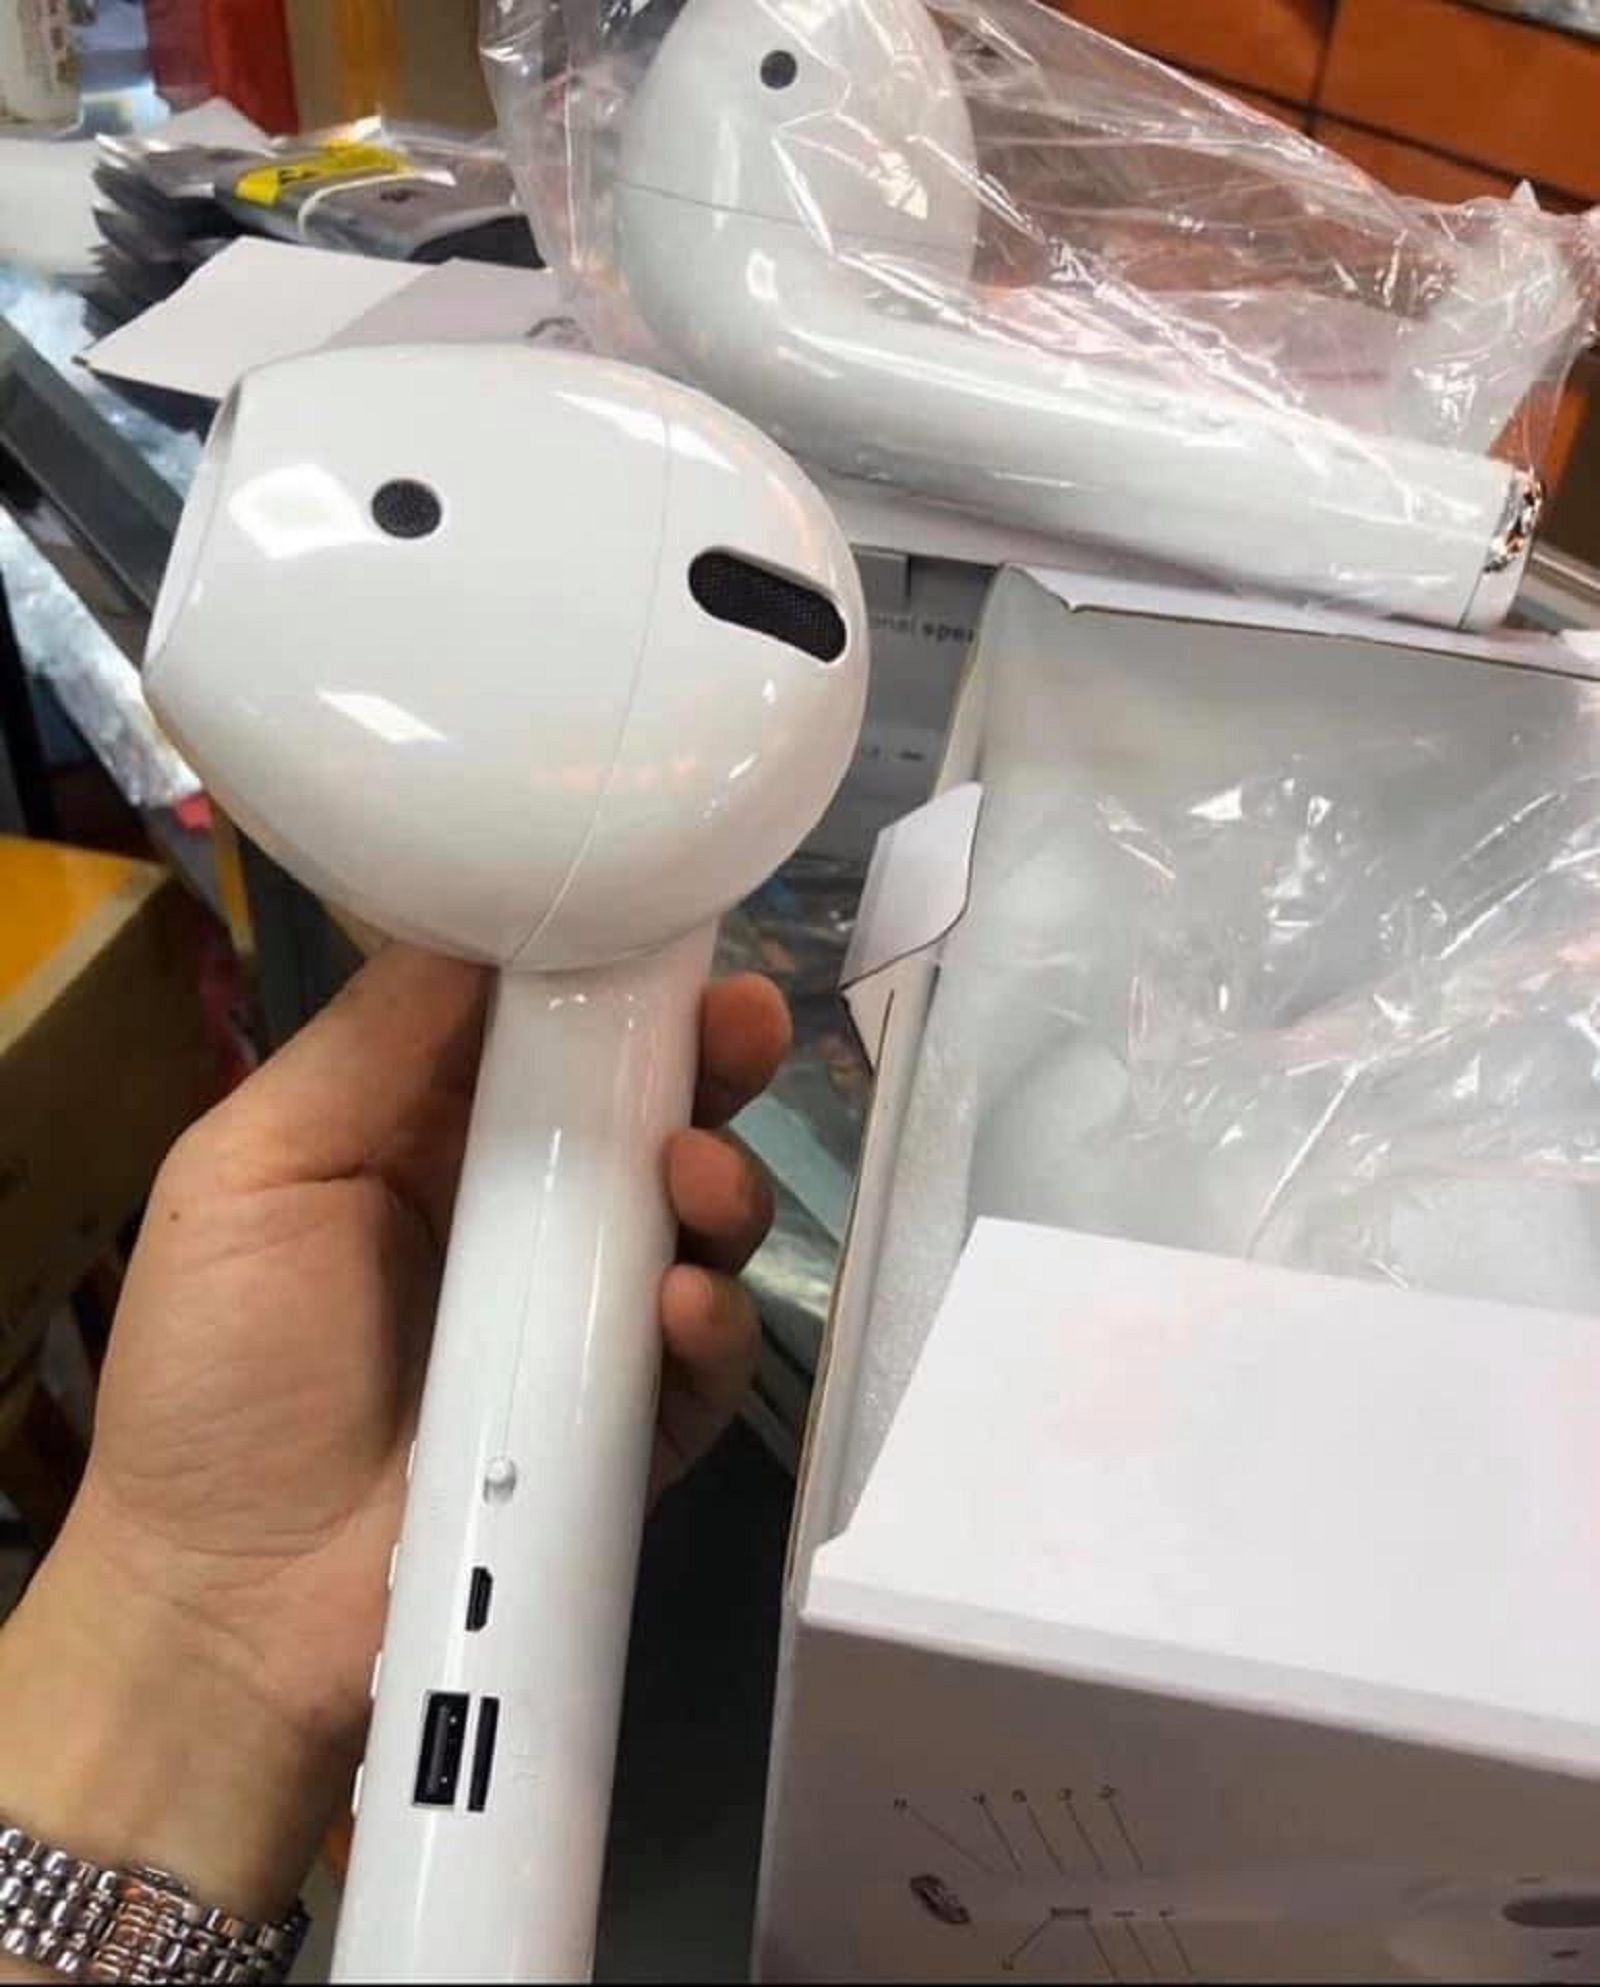 Some of the least aesthetically pleasing products and photos you'll ever see photo 29